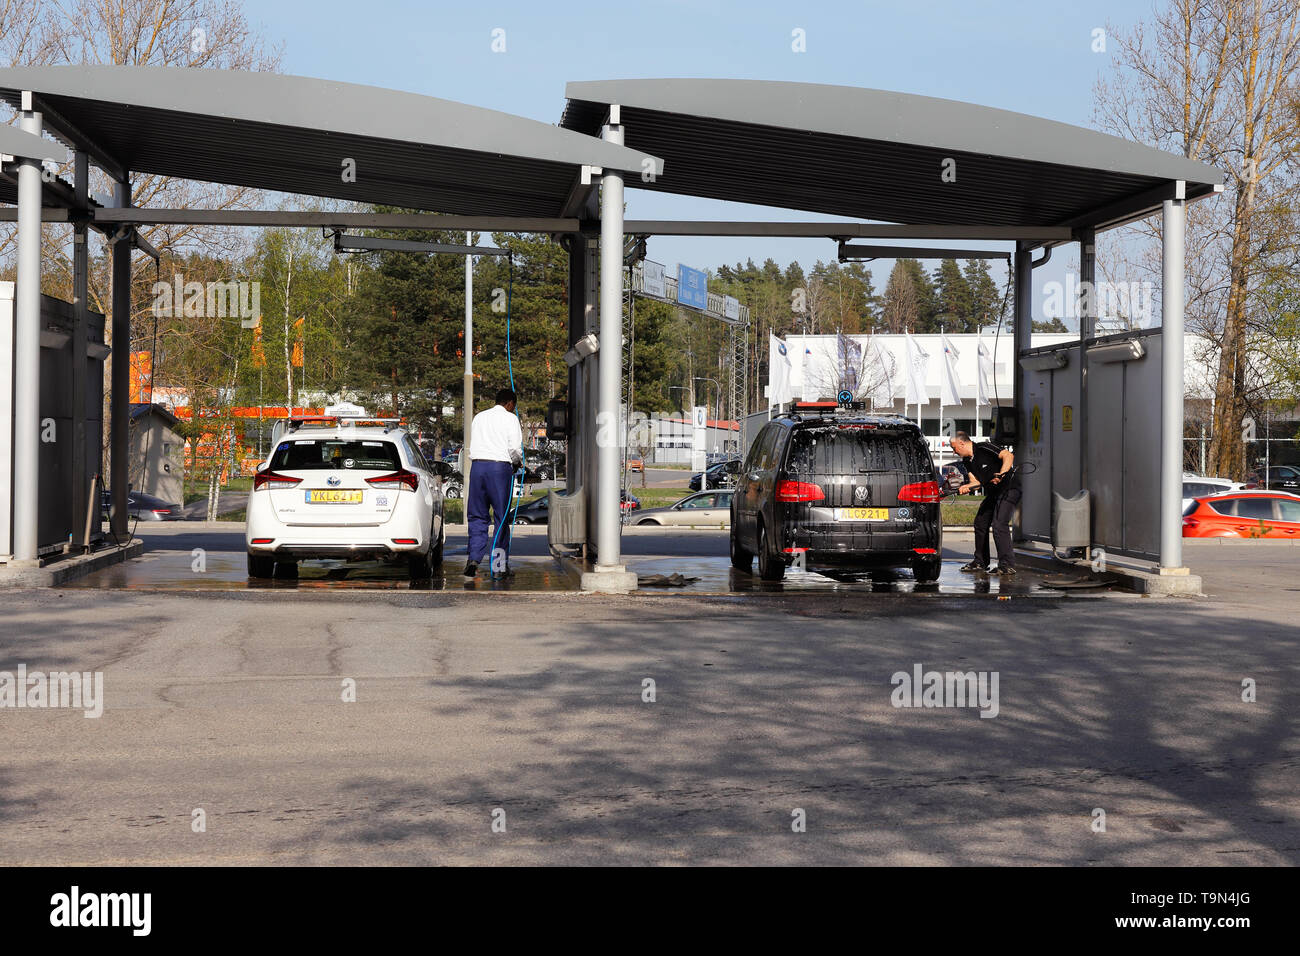 Orebro, Sweden - April 26, 2019: Two taxis and two persons washing enviroment friendly at the self service car wash. Stock Photo